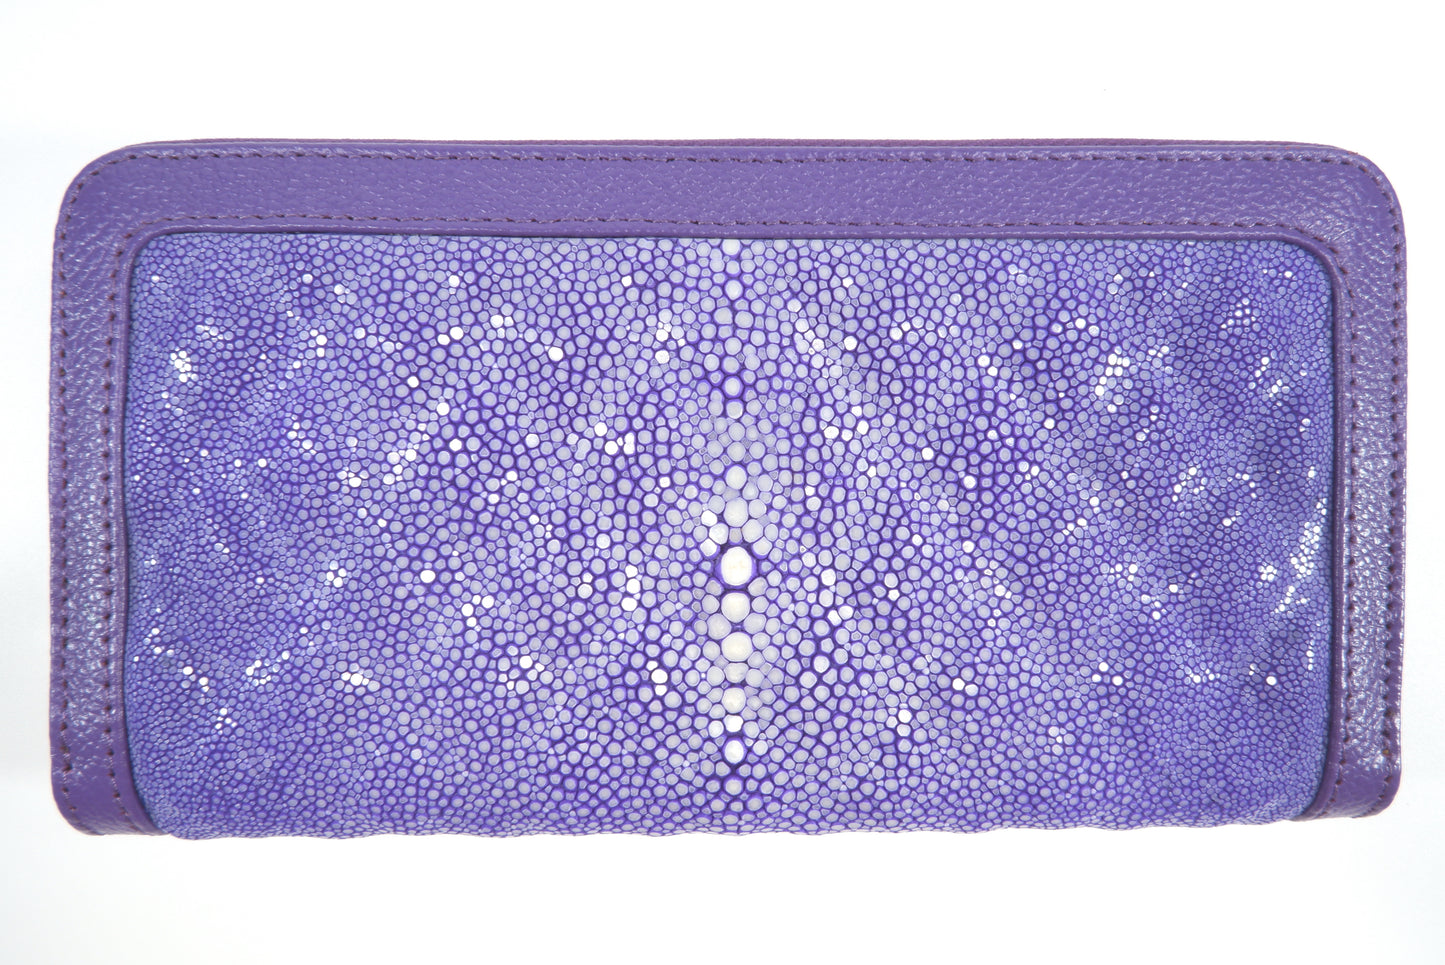 Genuine Polished Stingray Skin Leather Embossed Zip Around Clutch Wallet Purse